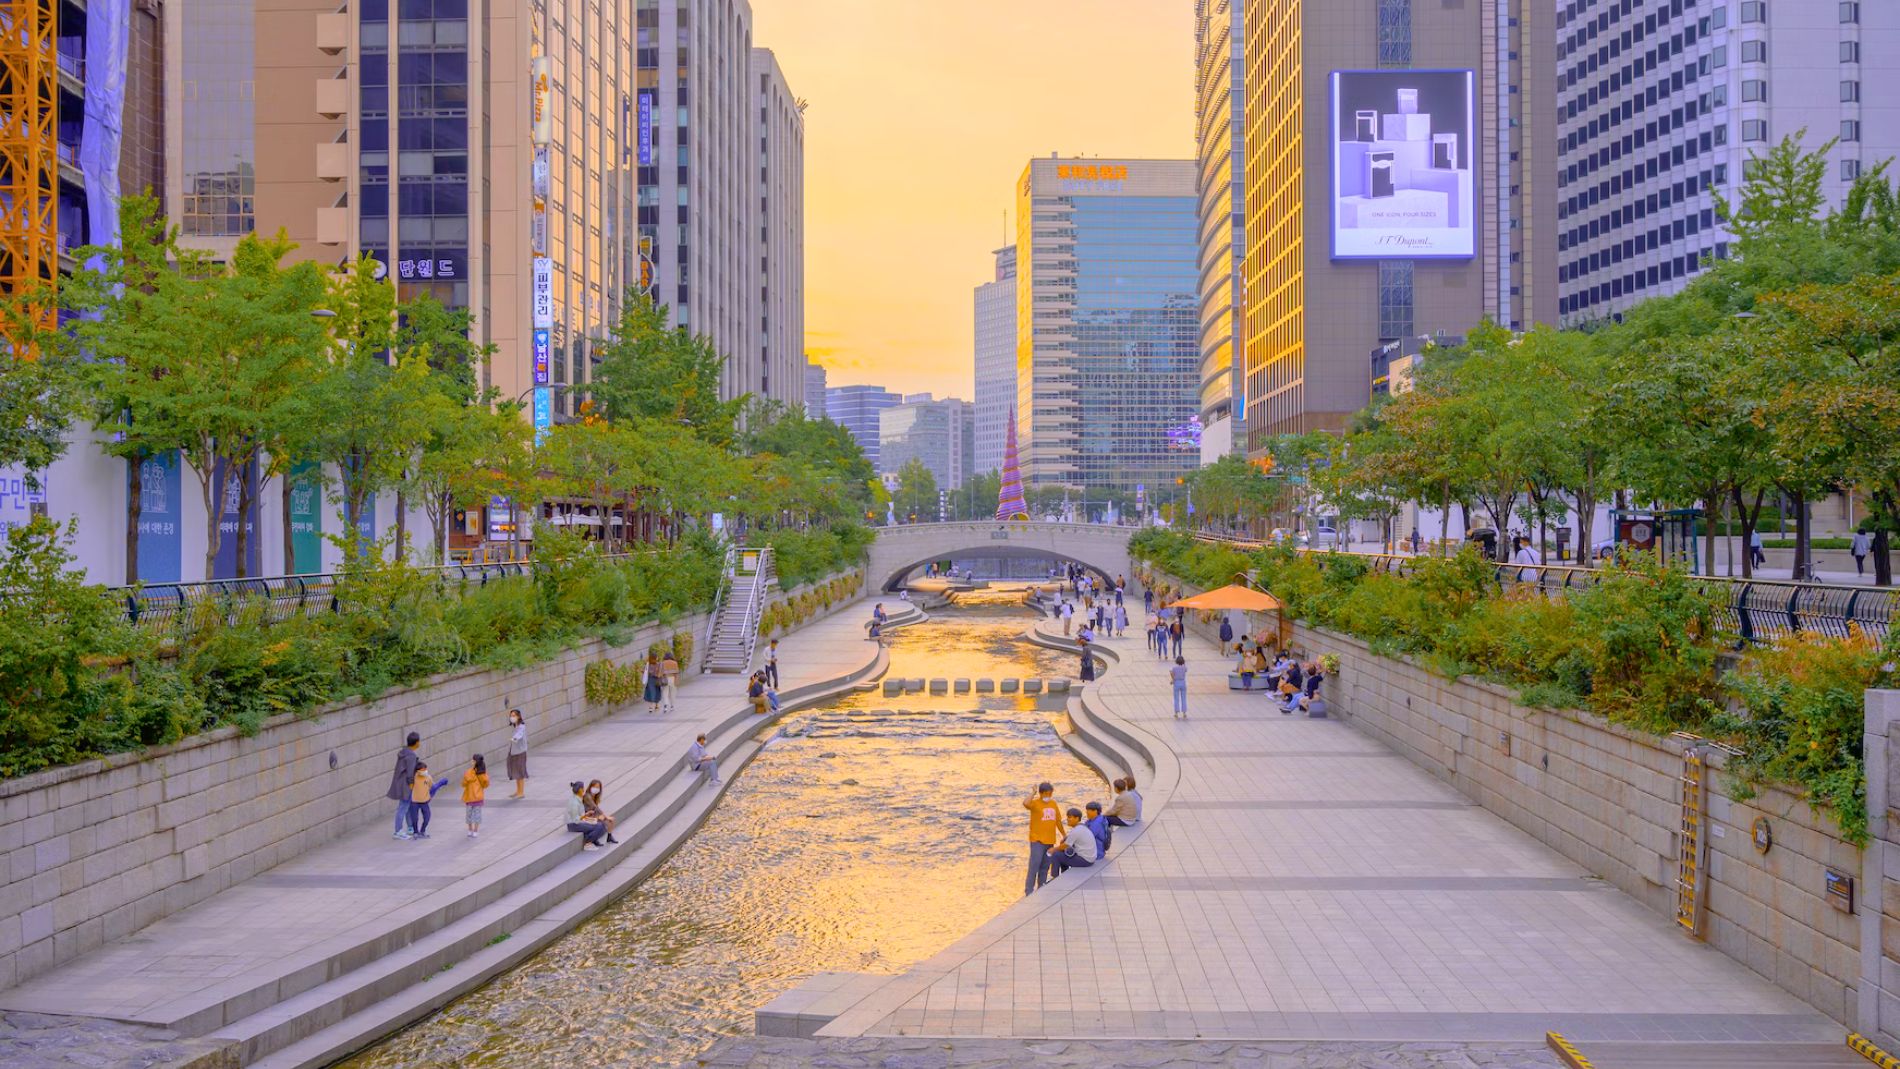 places to visit in seoul during summer